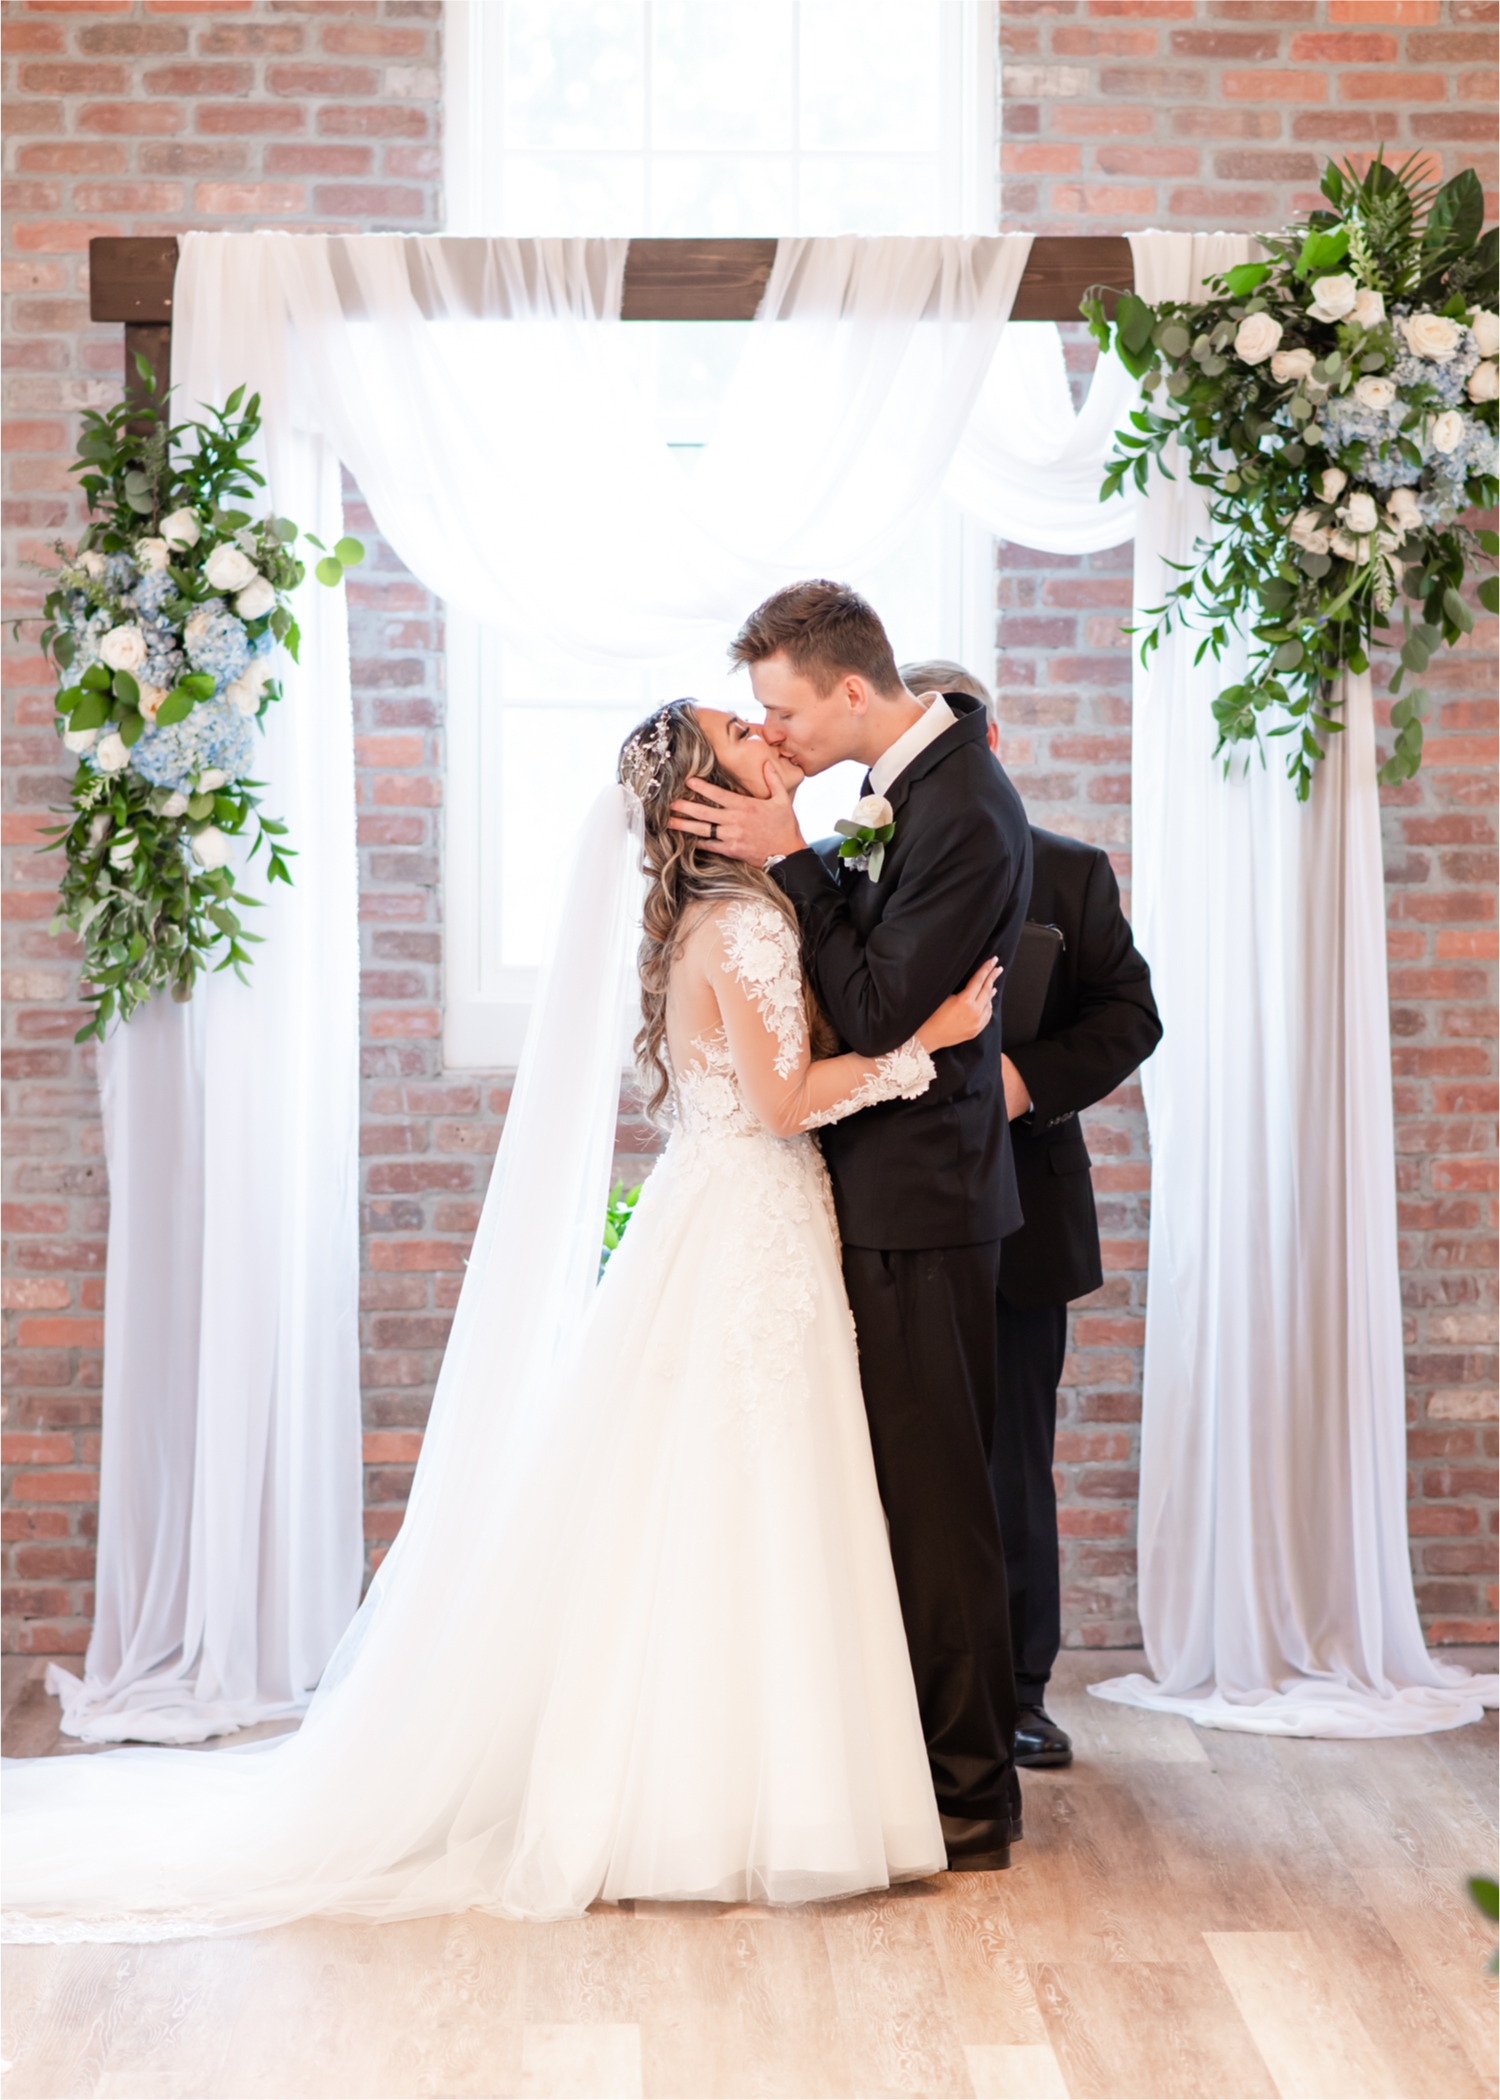 Romantic and Rustic Wedding at The Mill in Windsor | Britni Girard Photography | Colorado based wedding photography and videography team | Bride and groom first kiss